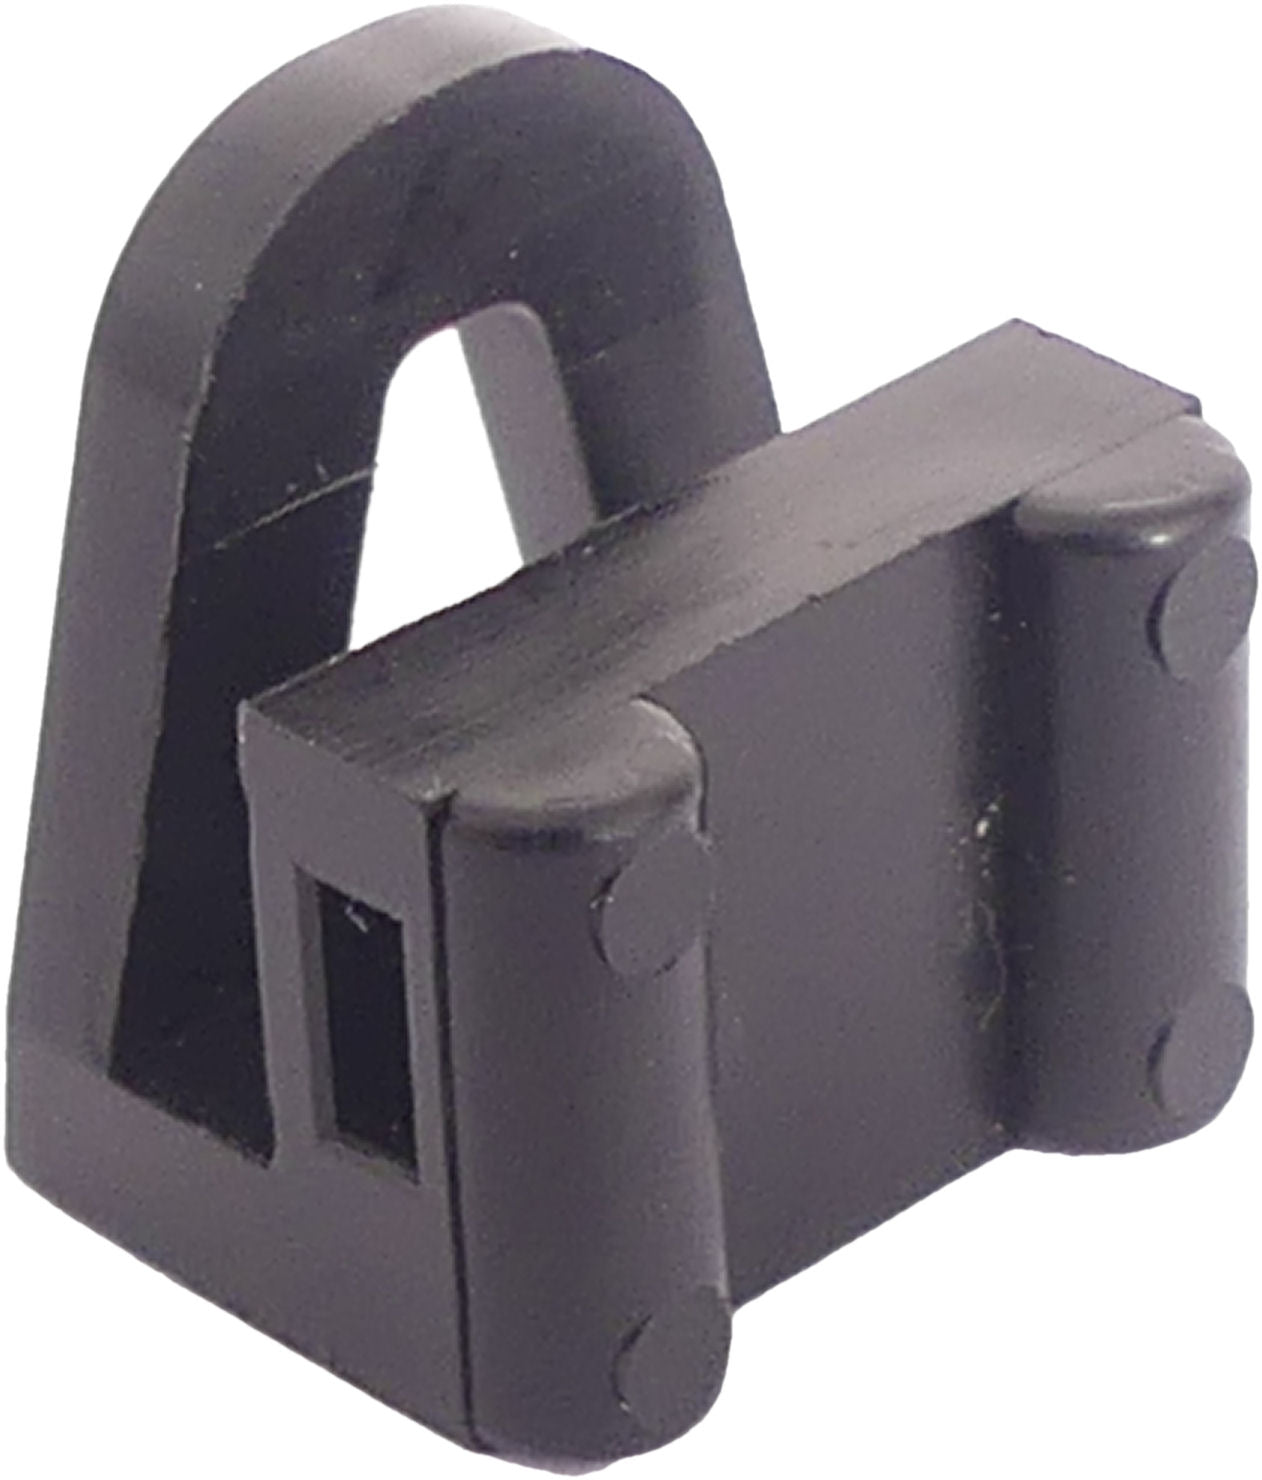 Gazelle Jas Protection Clamp 140 mm Tiewrap